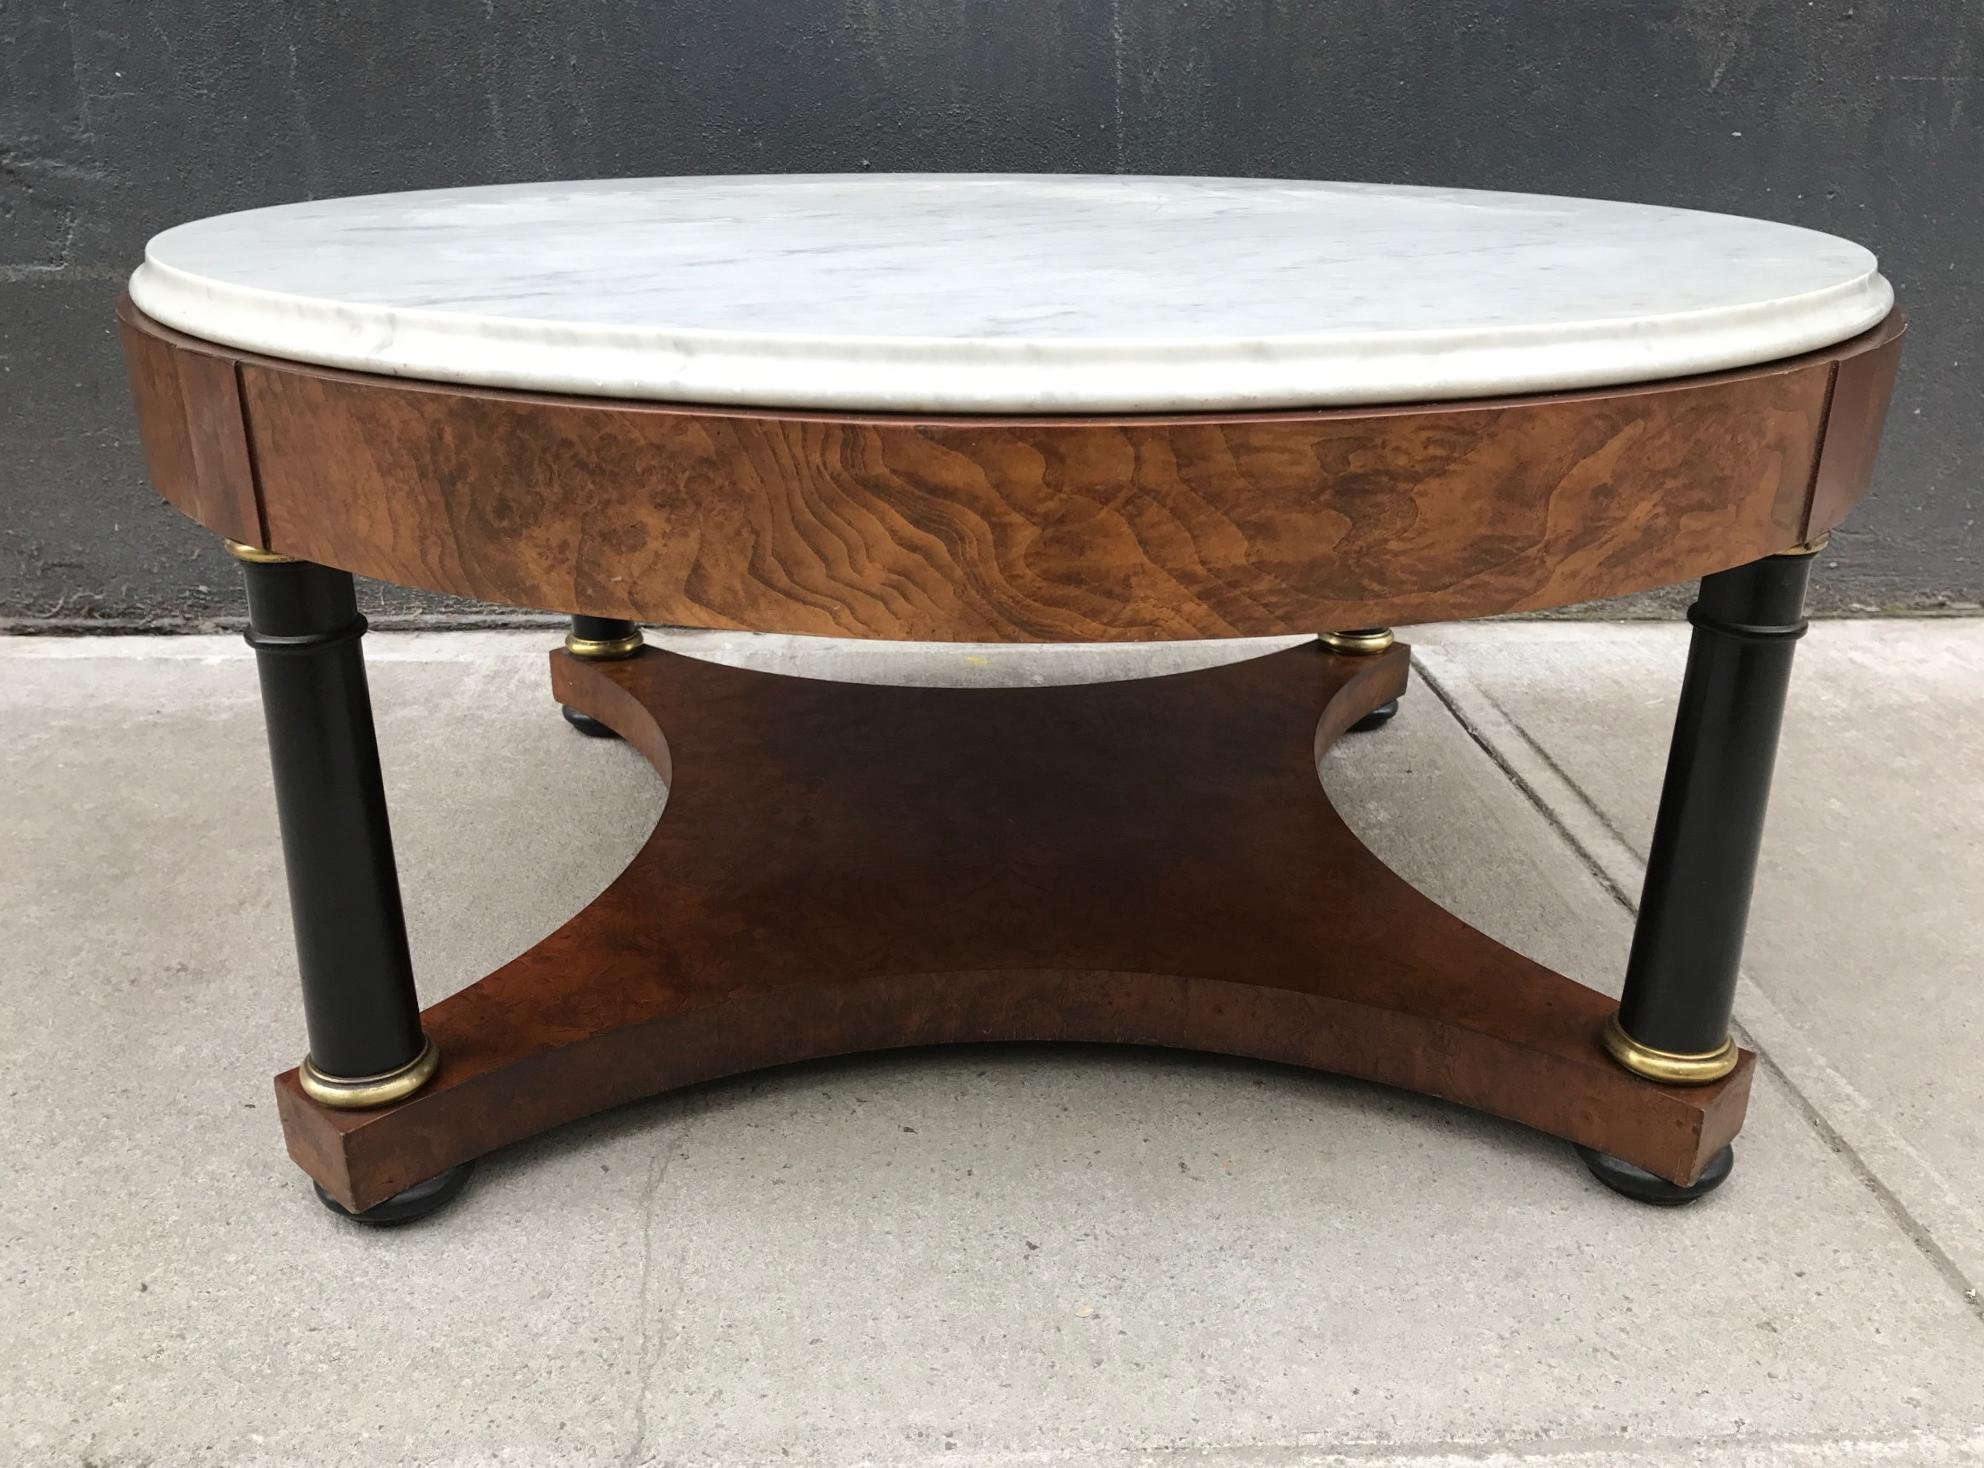 Marble top coffee table by Baker with black lacquered columns and brass trim.